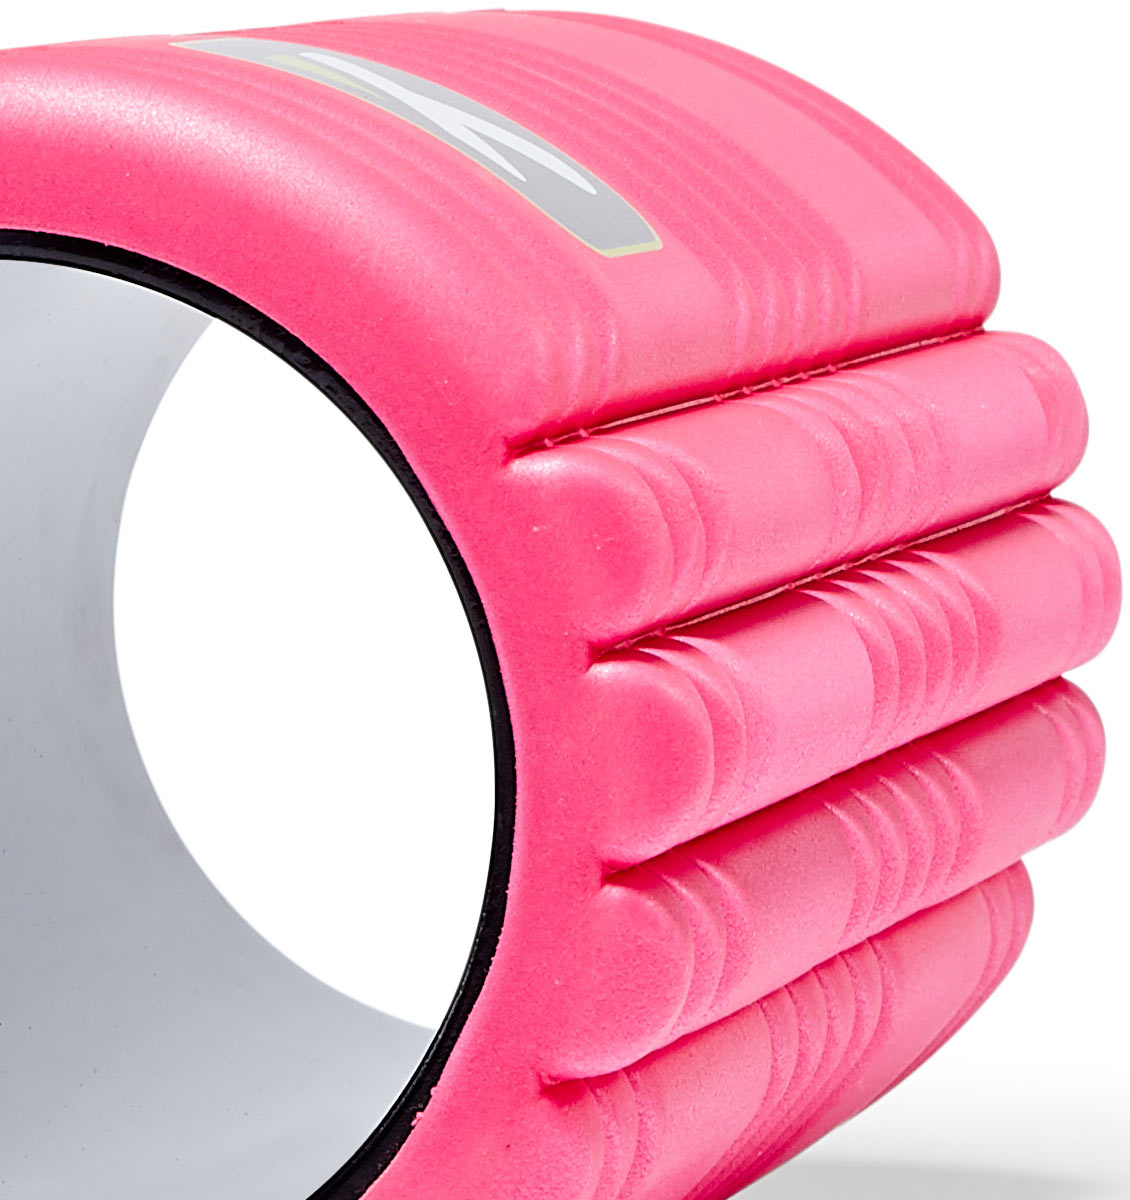 TPT3GRDPWS00000 TriggerPoint The Grid 1.0 Foam Roller Pink - 60 Degree Angle - Close Up